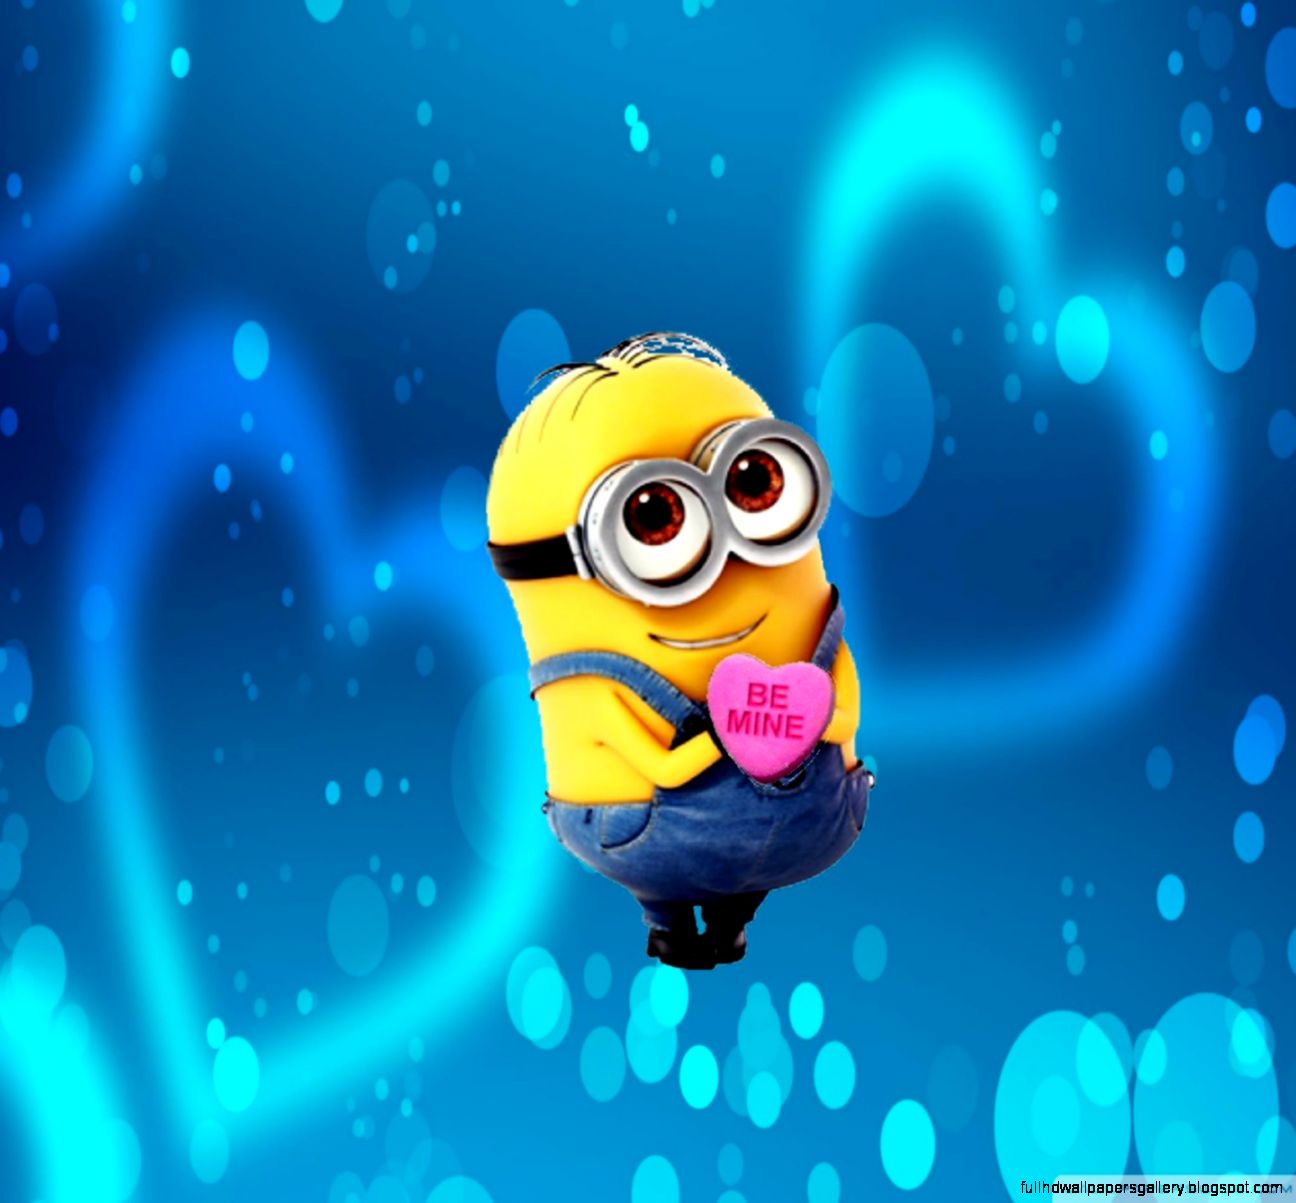 48 Hd Quality Minion Images Minion Wallpapers Hd Base - Redmi Note 4 Back Cover Minions - HD Wallpaper 